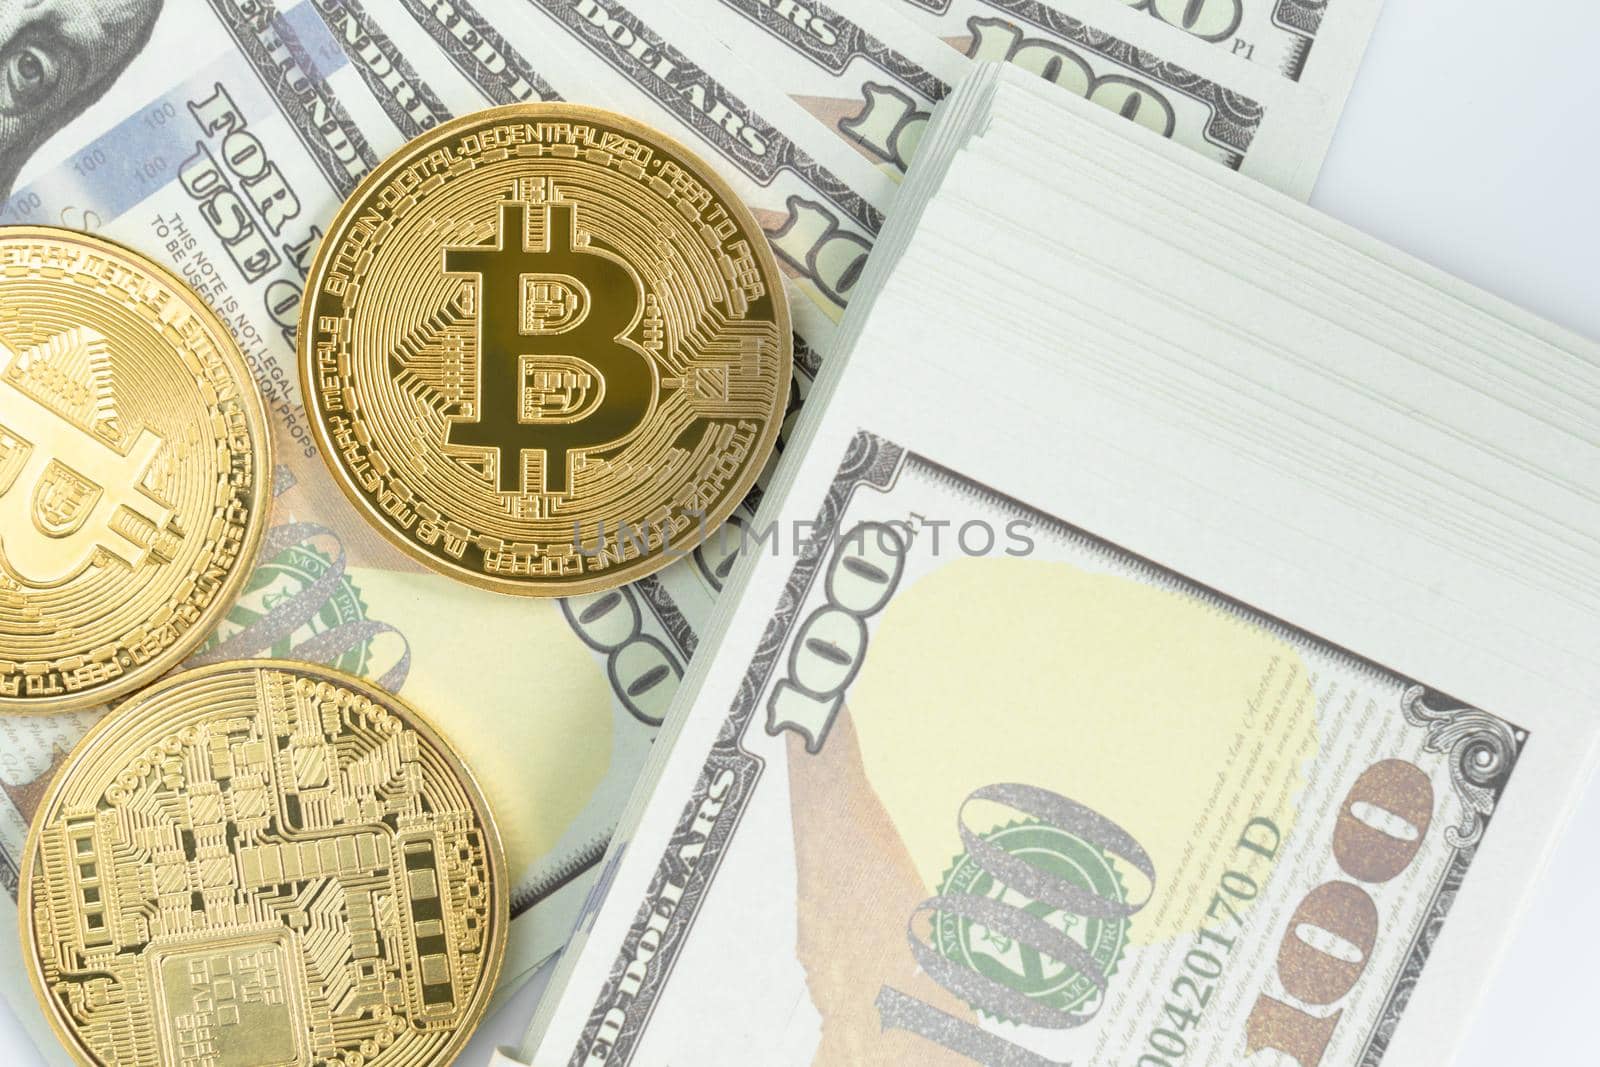 Bitcoins coin and  US banknotes of one hundred dollars. Close up of metal shiny bitcoin crypto currency coins and US dollar